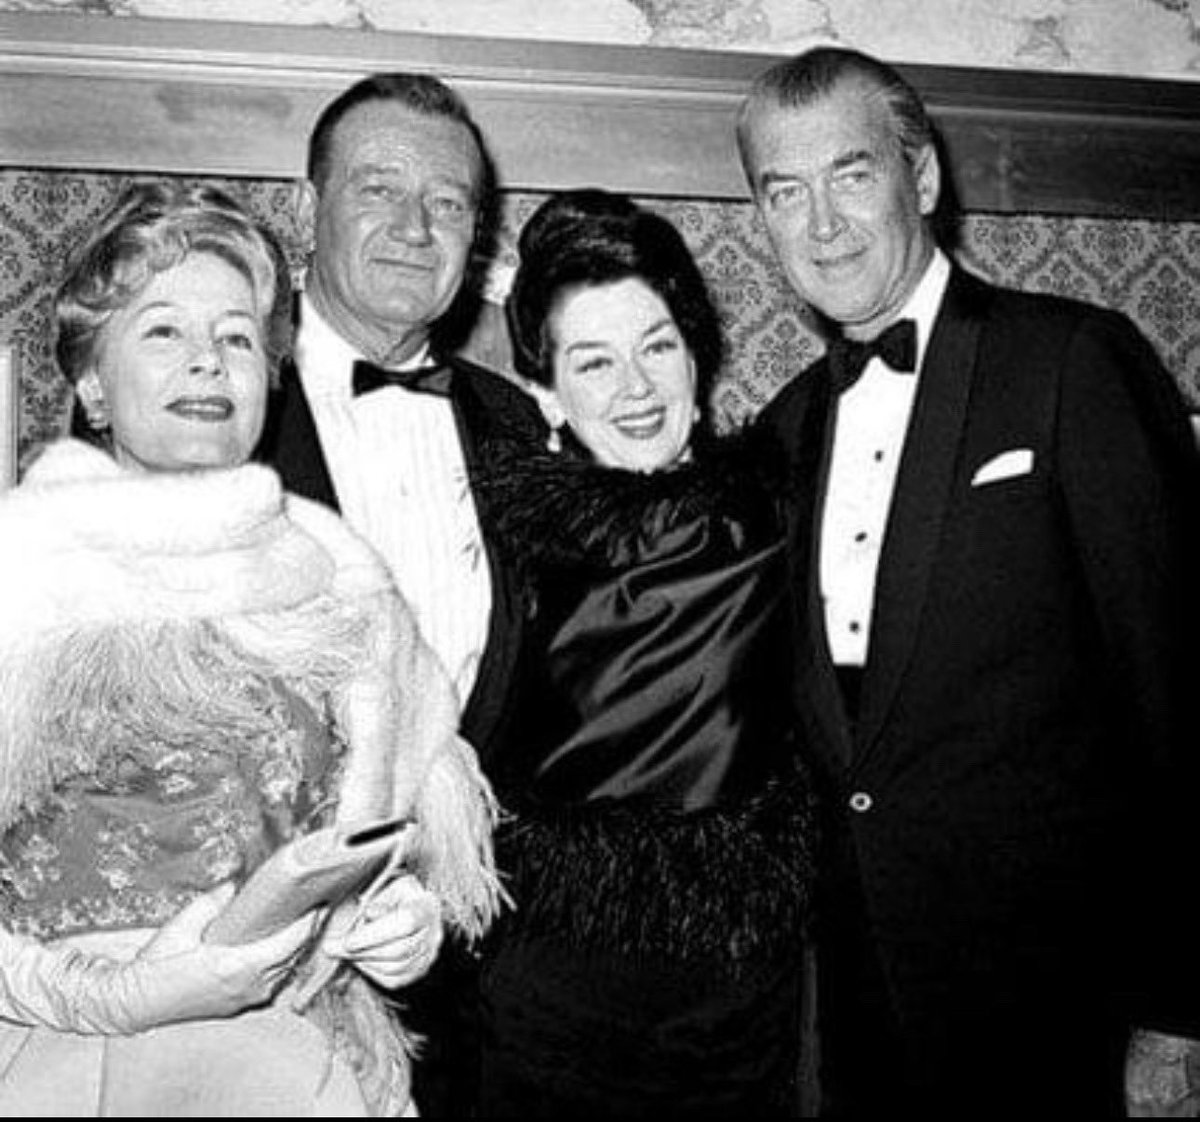 I love seeing photos like this knowing they were old chums over the years. #IreneDunne #TheDuke #Roz and #JimmyStewart at the premier of How The West Was Won